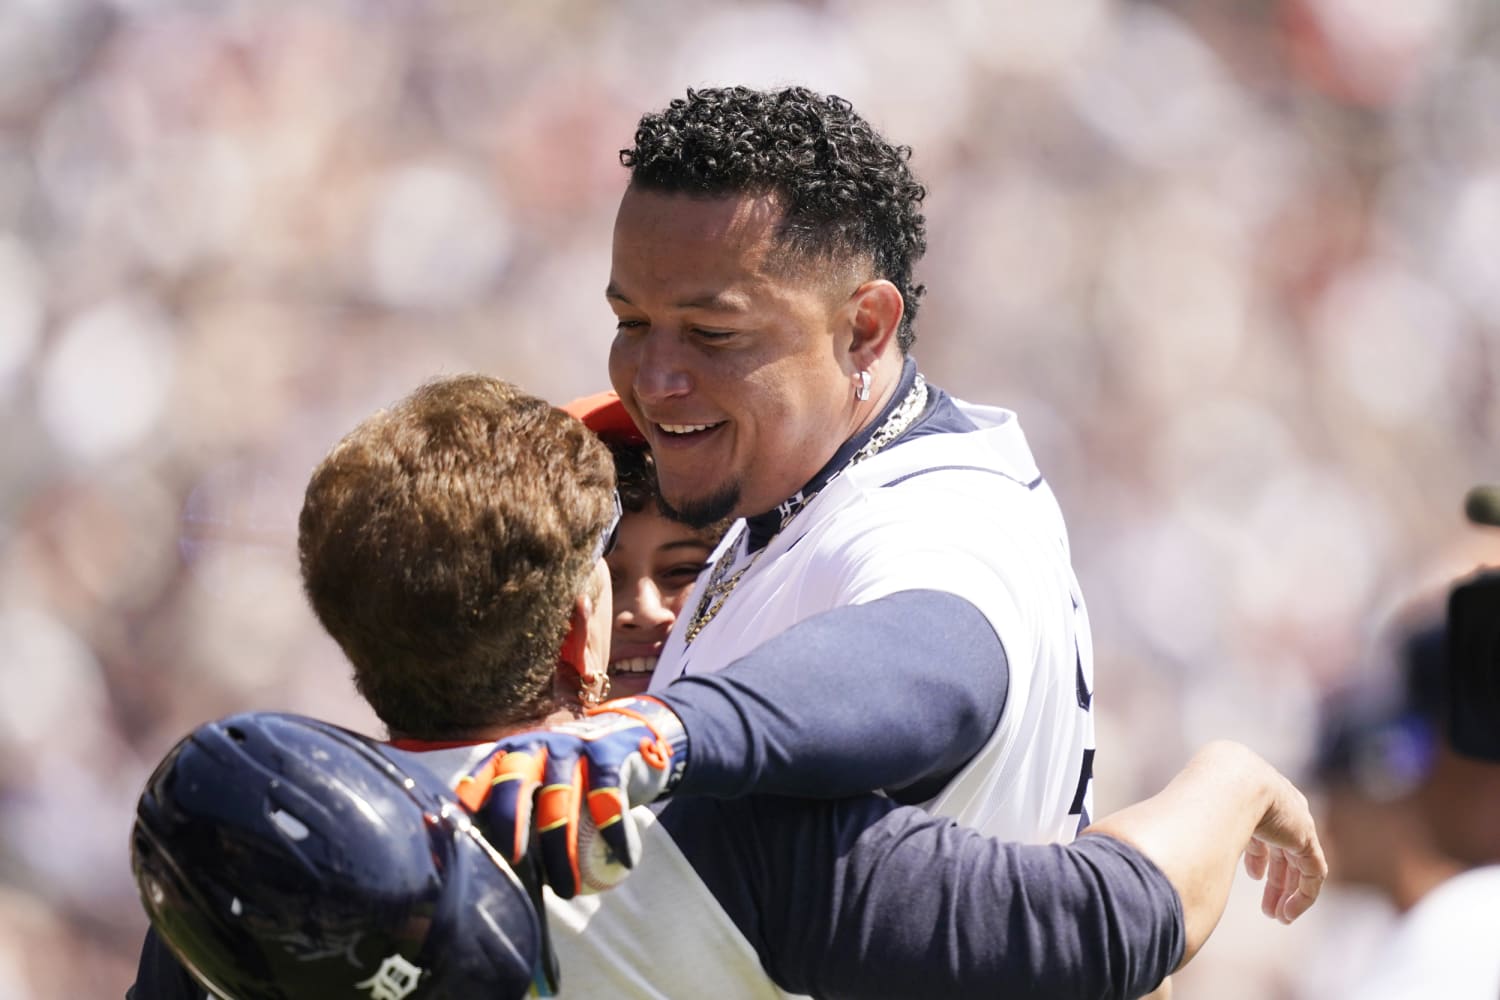 Tigers' Cabrera Smiles His Way to a Triple Crown - The New York Times